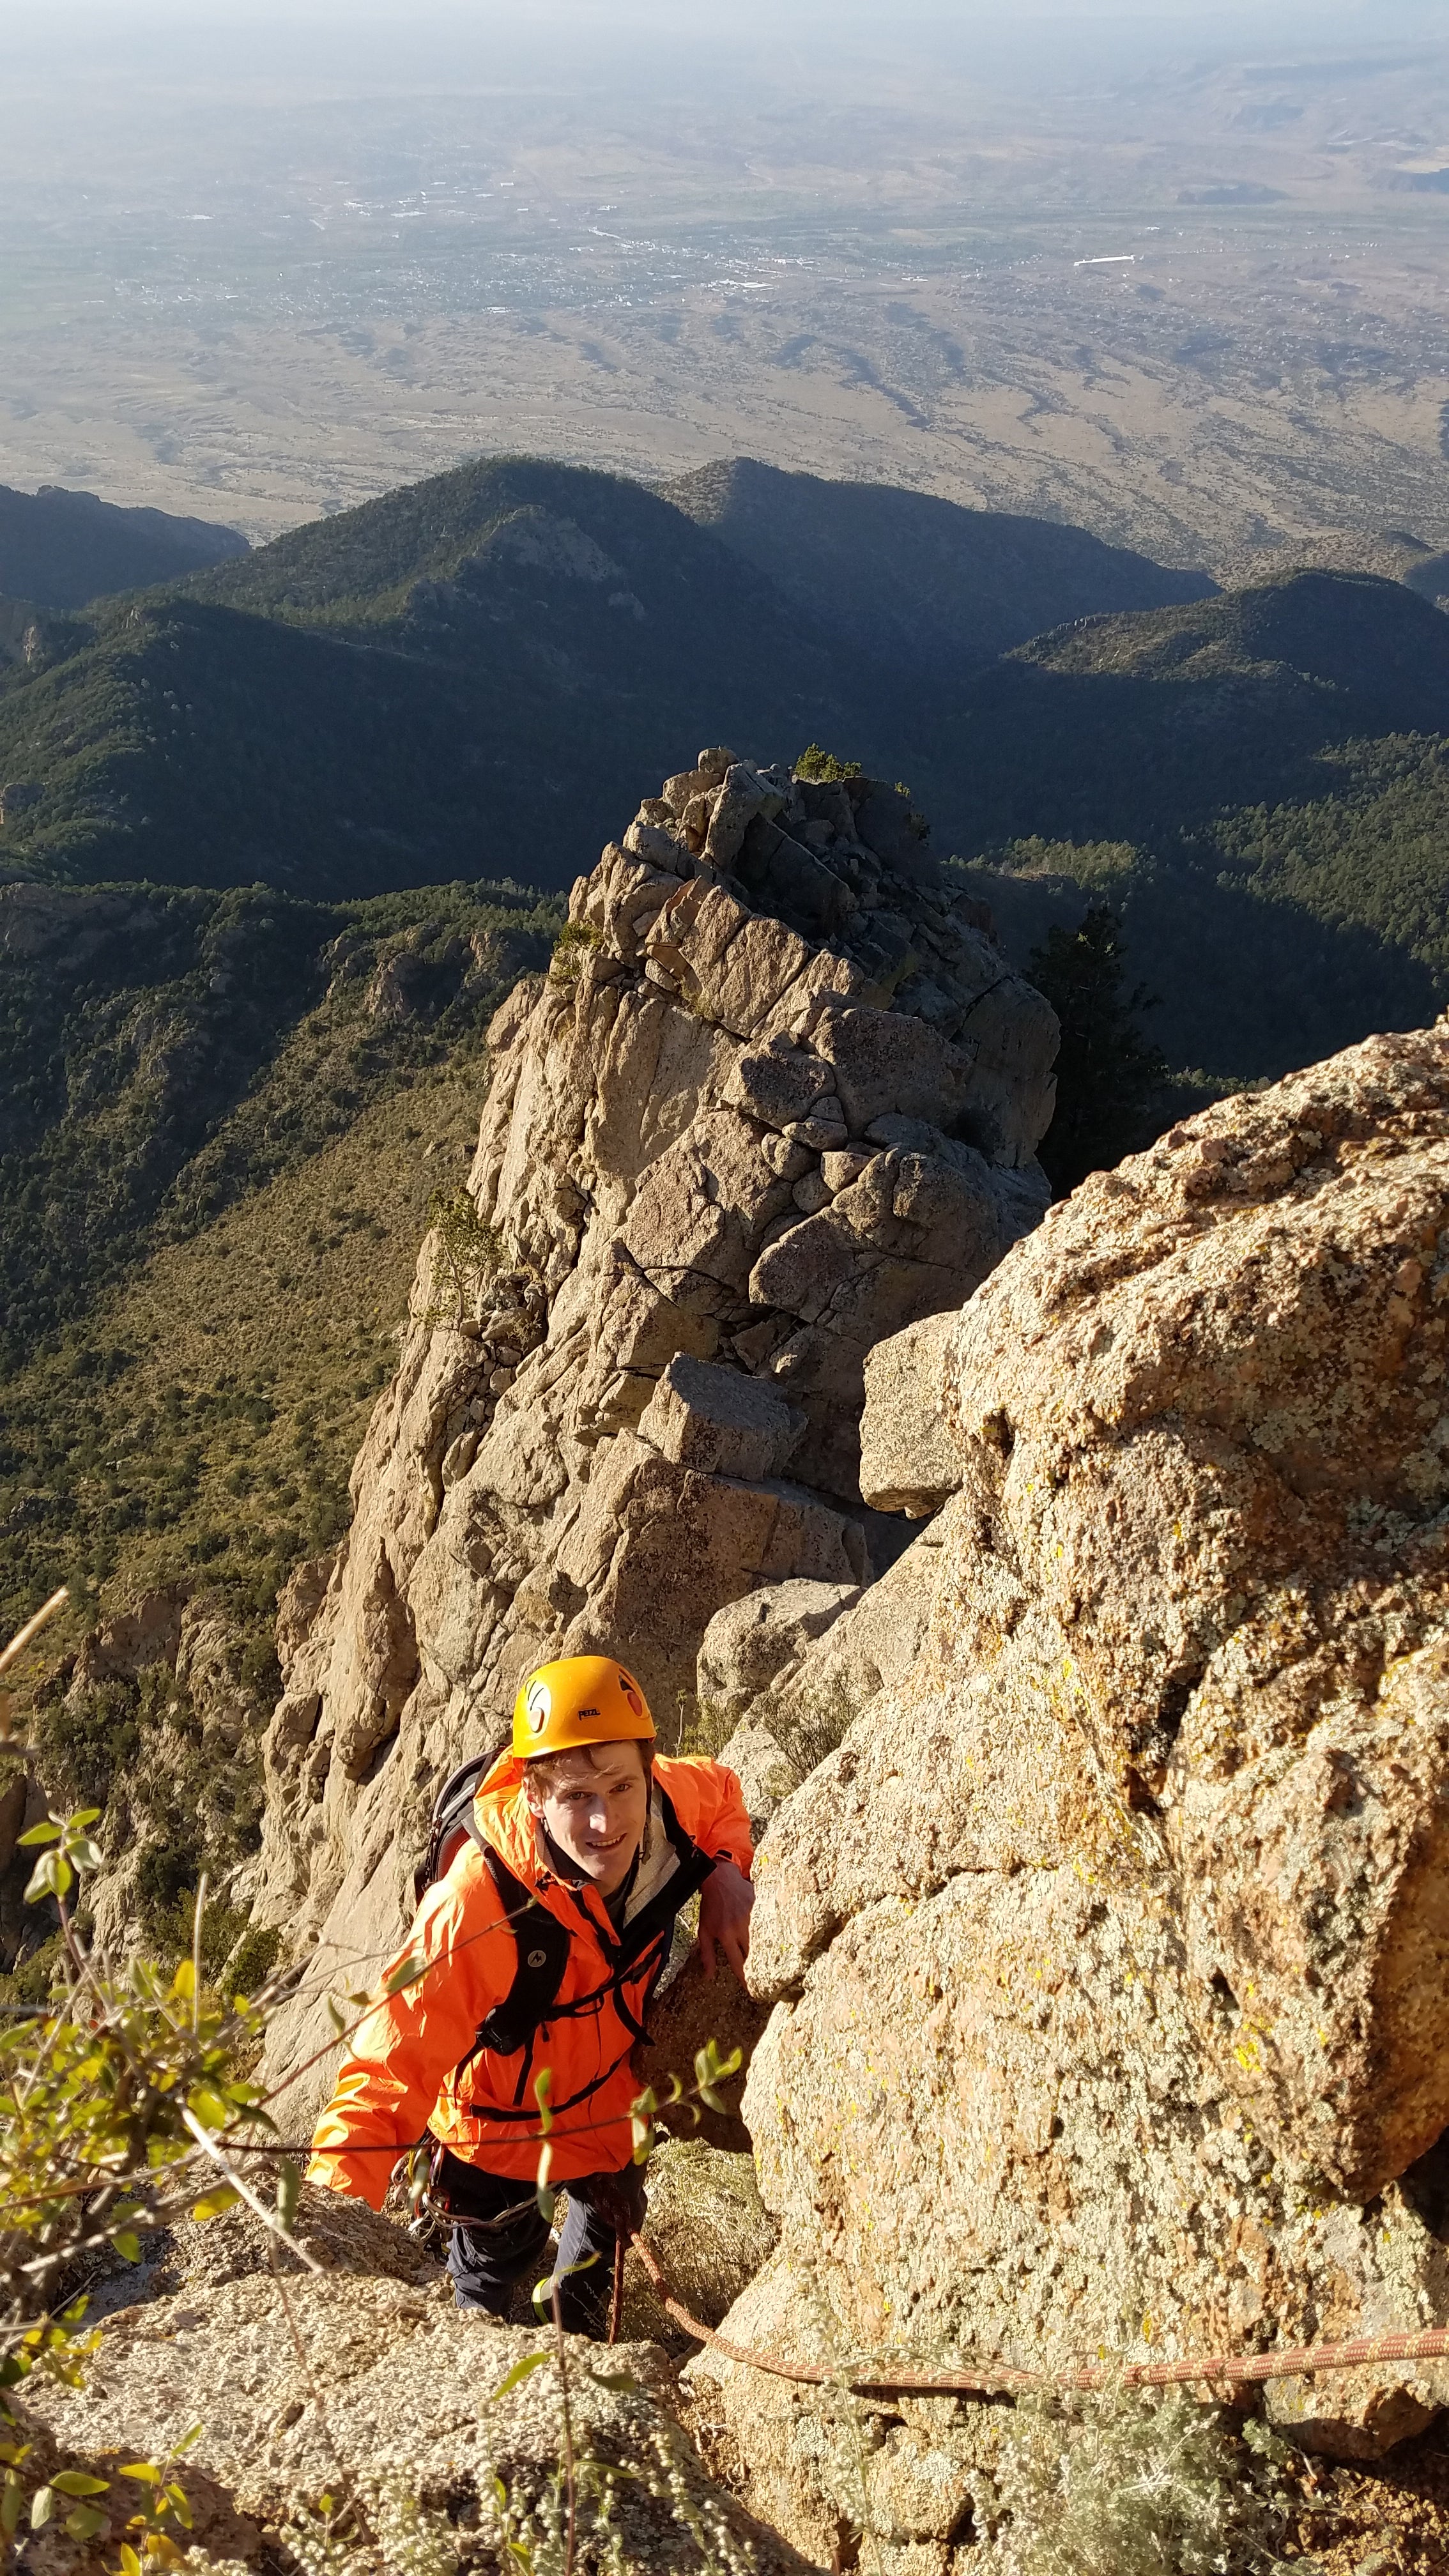 Just past the "W' on the Knife Edge of The Shield in the Sandia's near Albuquerque